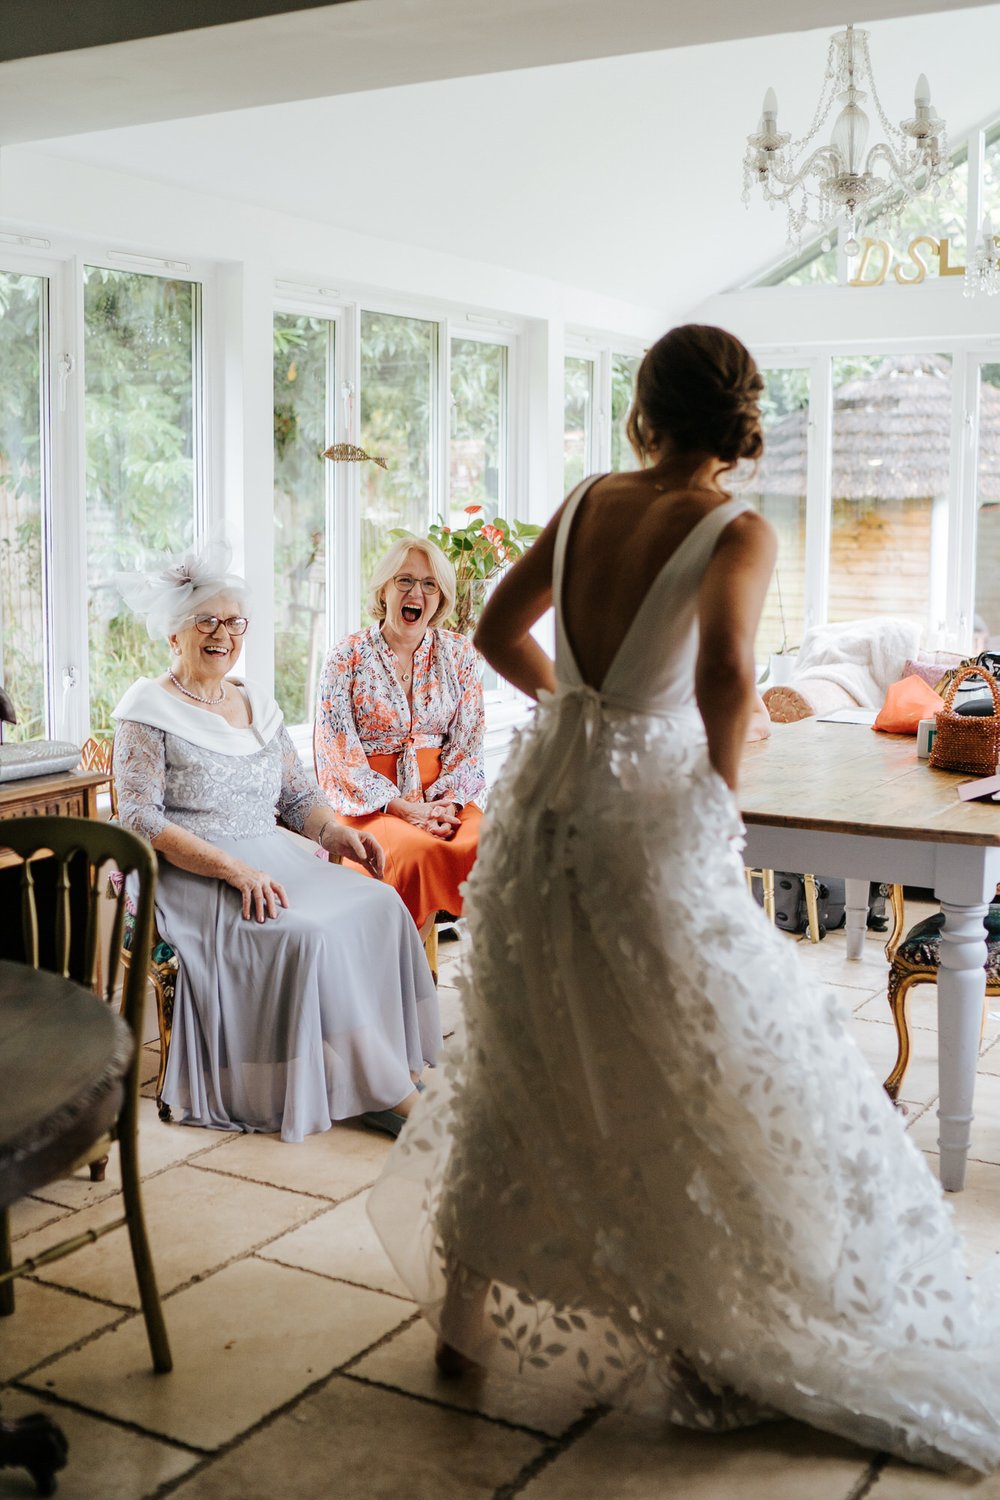 Bride's mother and grandmother react to seeing the bride in her wedding dress